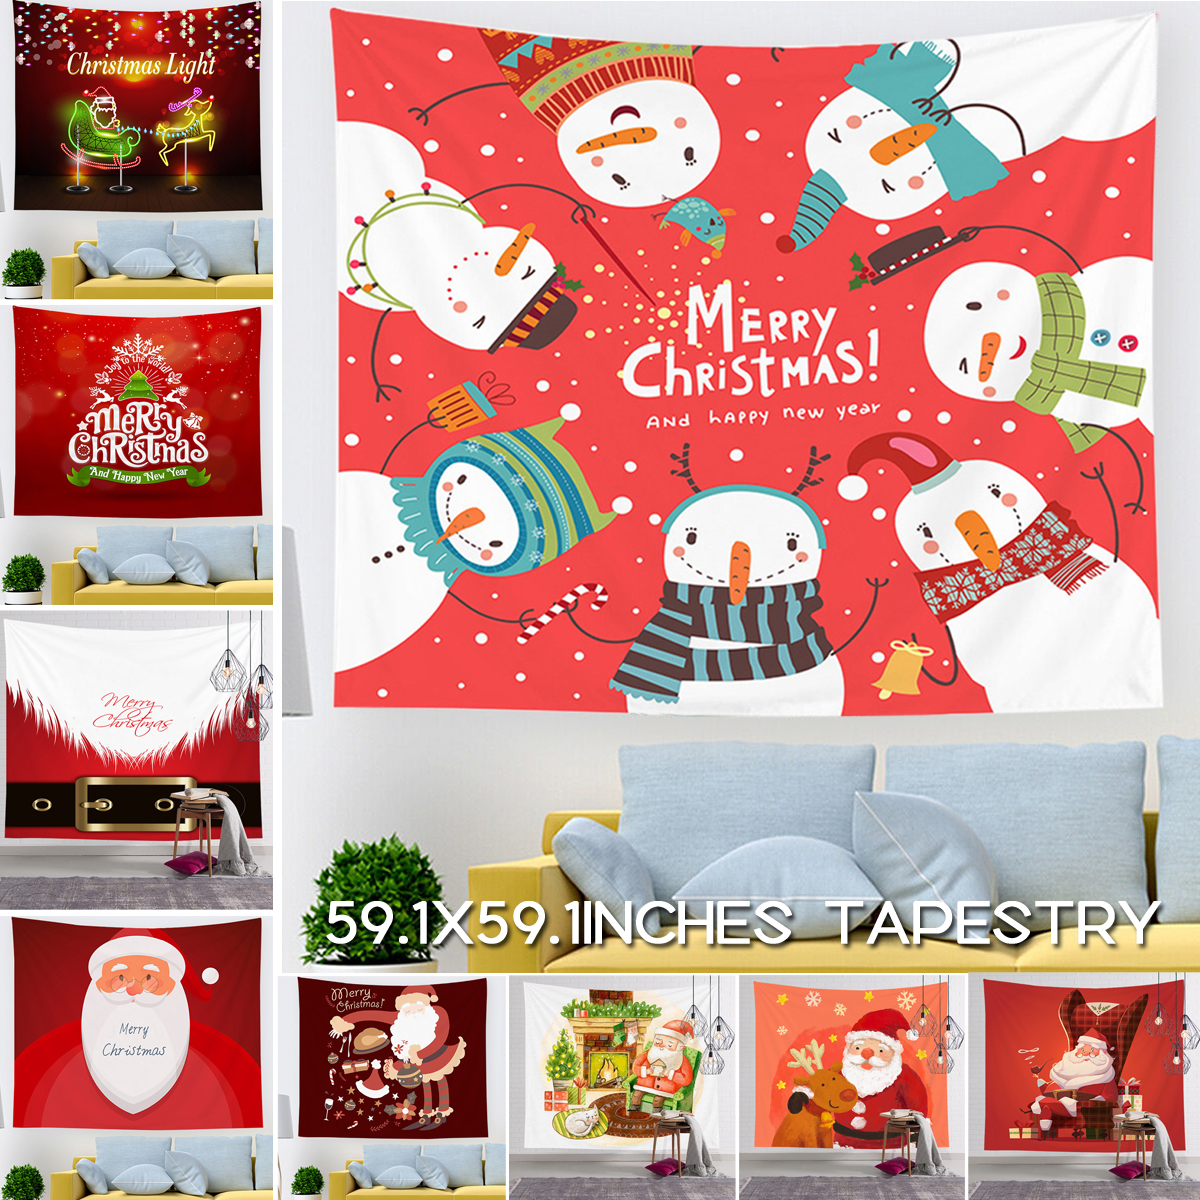 Christmas-Hanging-Cloth-Custom-Red-Santa-Claus-Bedside-Photography-Background-Cloth-Wall-Bedside-Dec-1749899-7